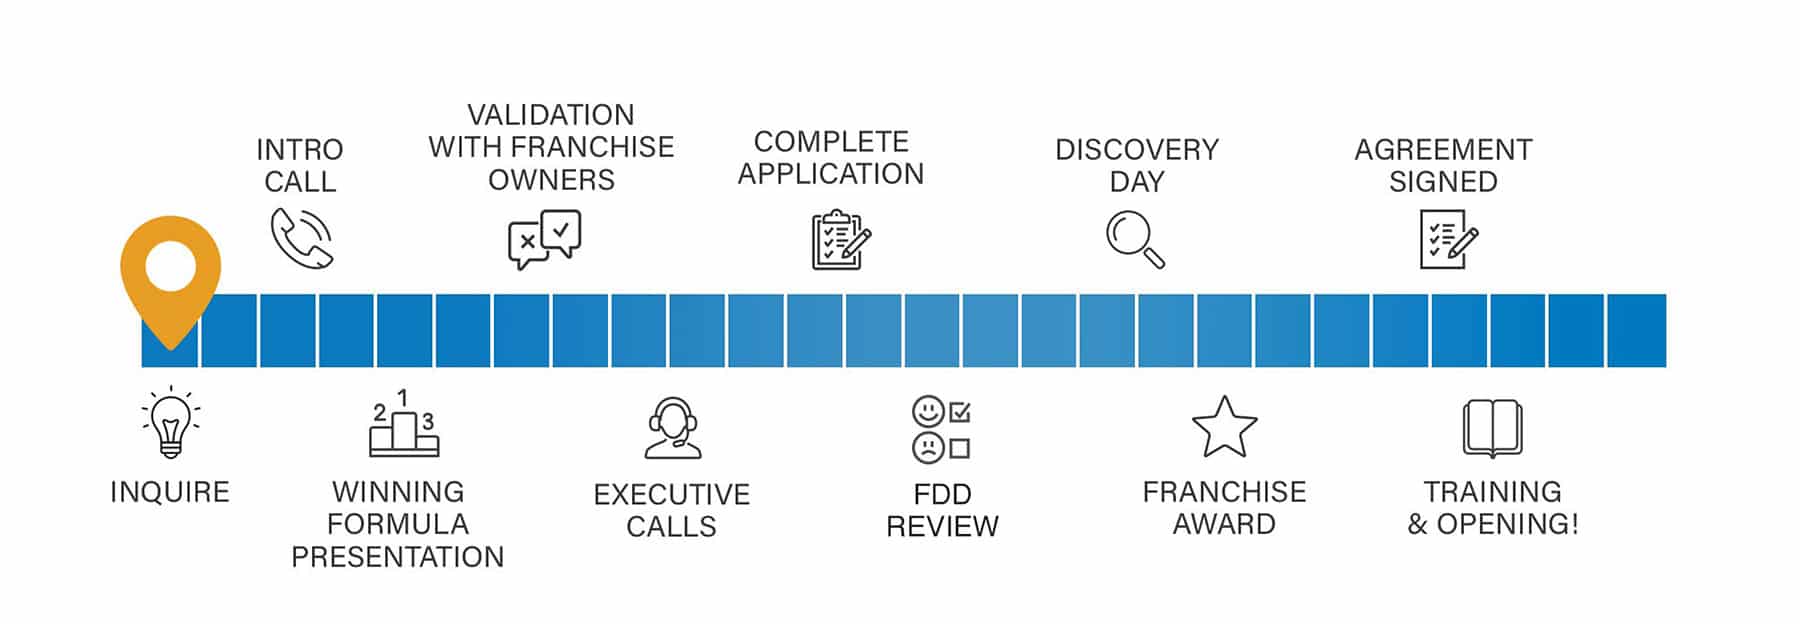 A graphical timeline of the Franchise Process Outline. The following steps are outlined: Step 1: Get to Know Us. Step 2: Learn More About Money Pages. Step 3: Speak with Our Franchise Owners. Step 4: Read our FDD. Step 5: Meet Our Team at Discovery Day. Step 6: Complete Your Research. Step 7: We Complete Our Research. Step 8: Franchise Award. Step 9: Market Launch.